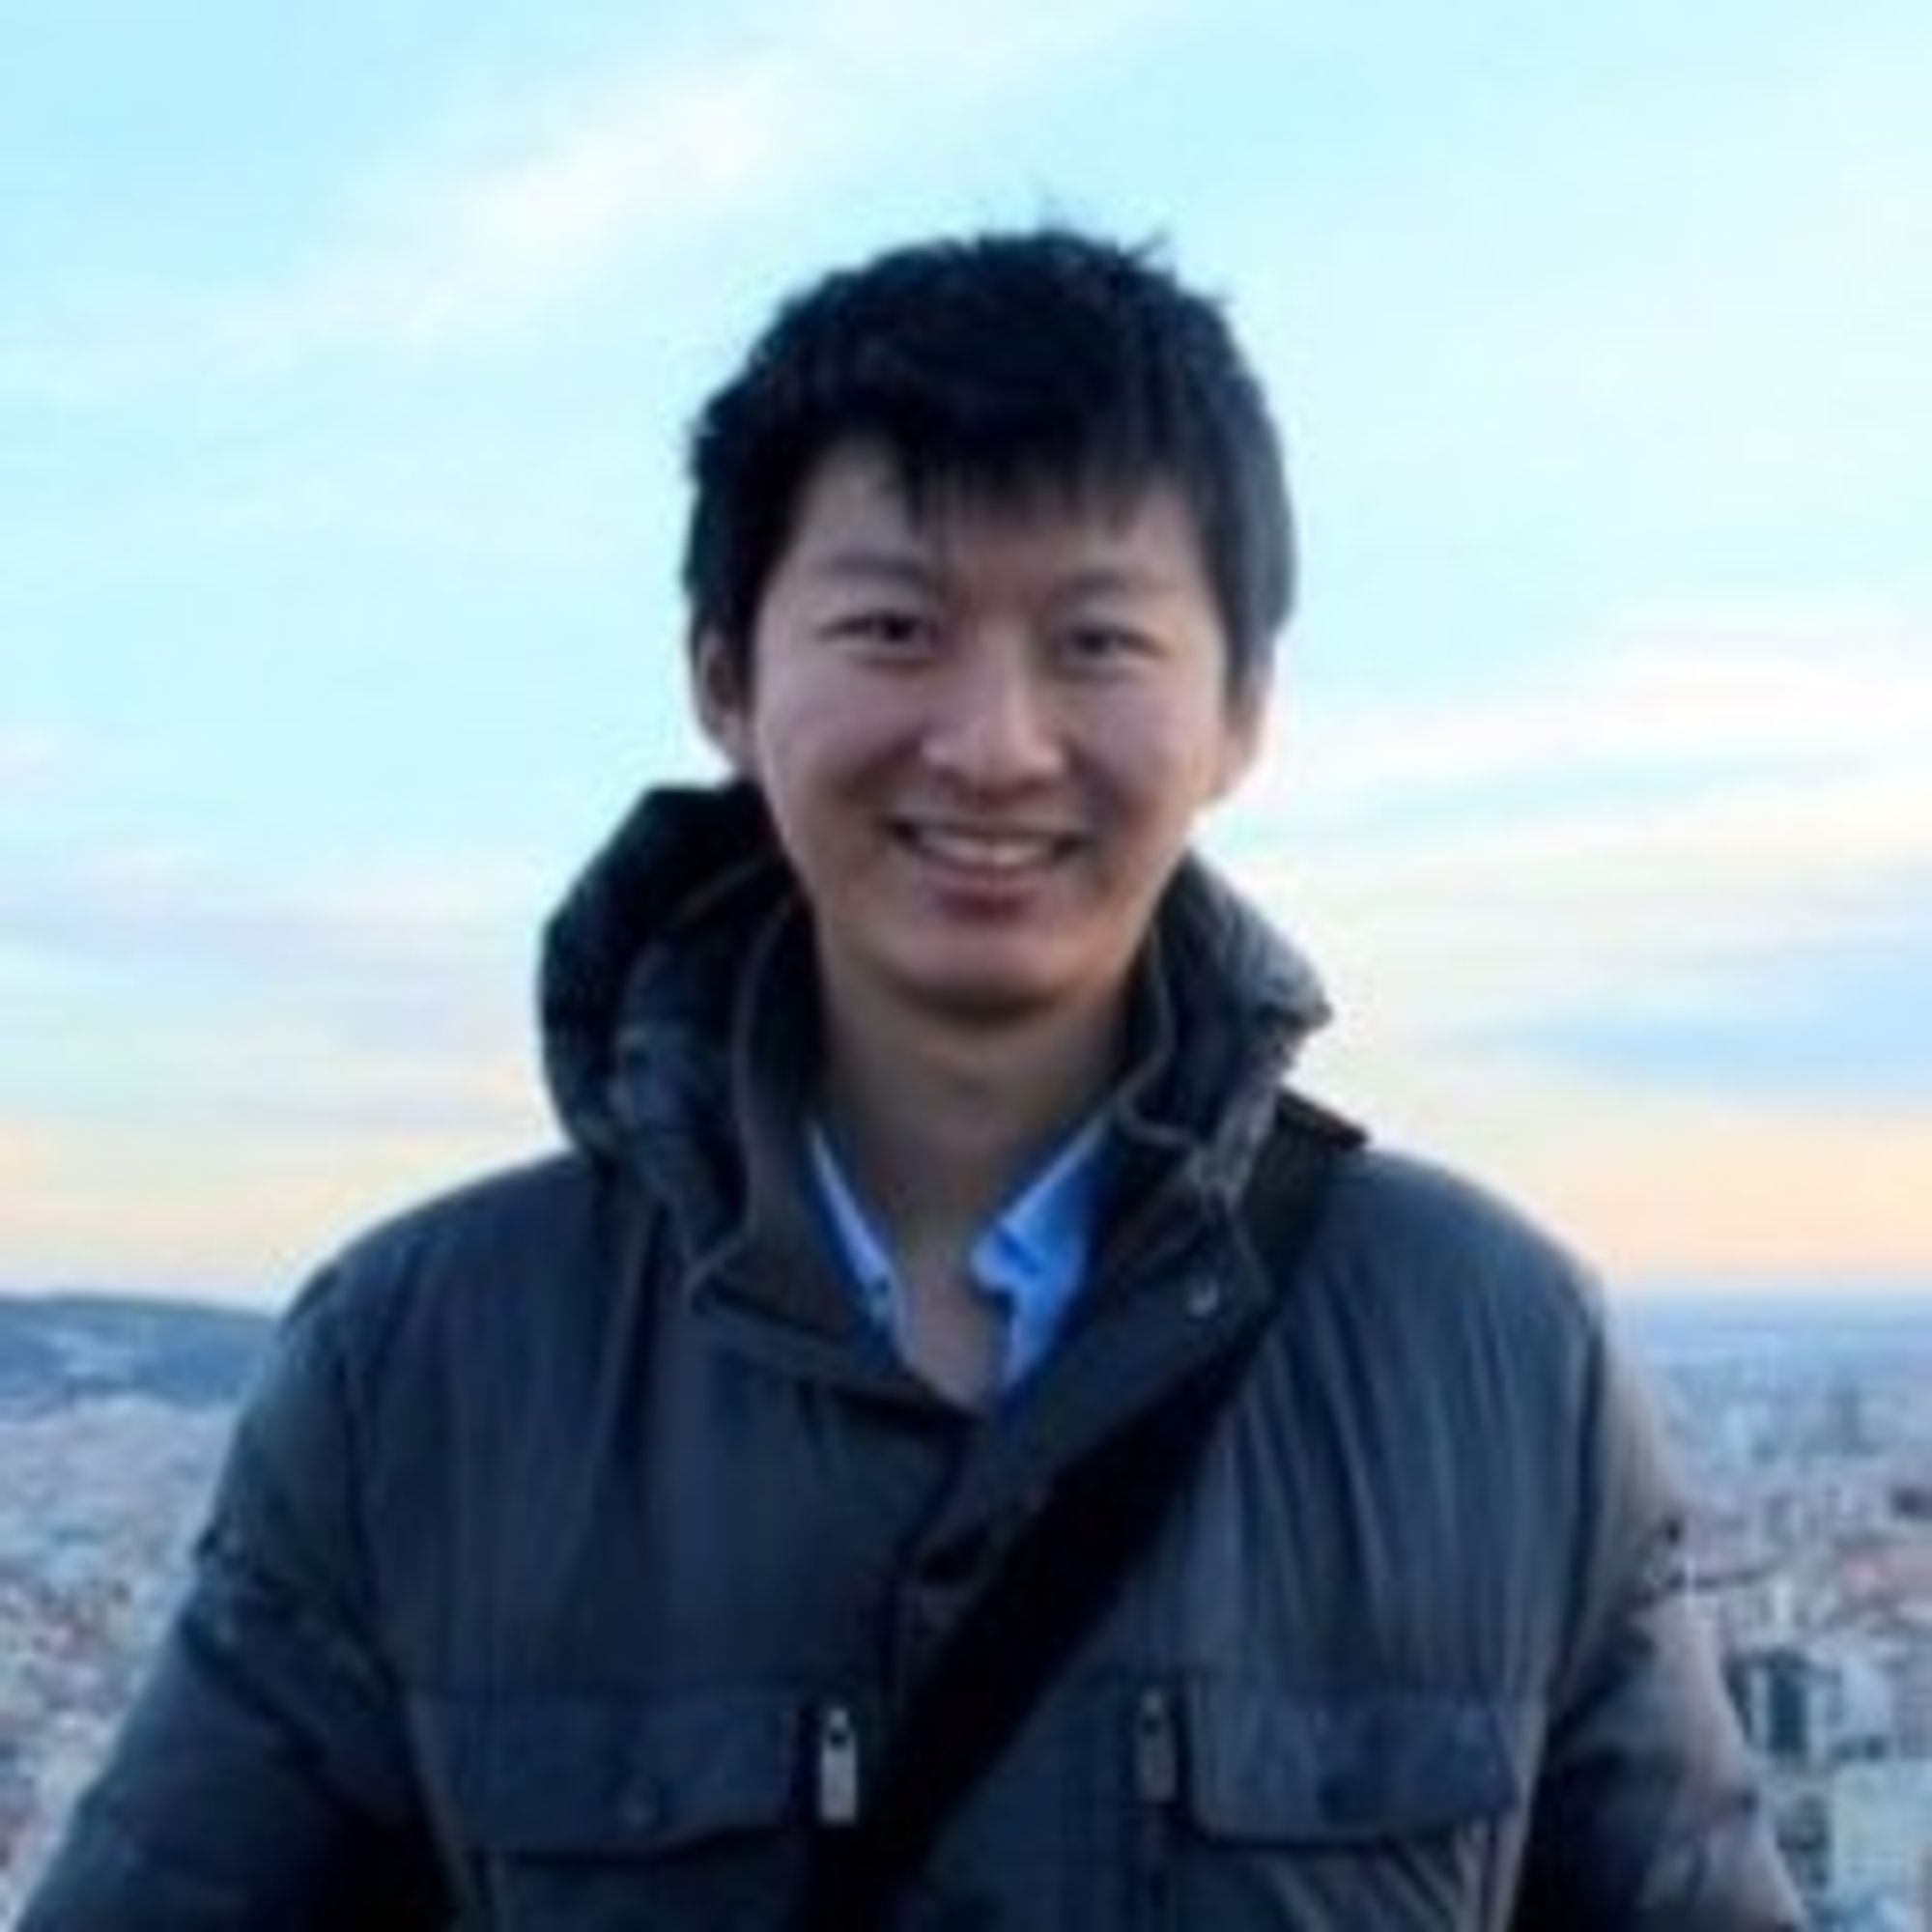 Lu Cheng 
Co-founder, CTO 
Prior Head of Eng. for Airbnb Experiences (70+ engineers and data scientists) • Loves cheesy bread